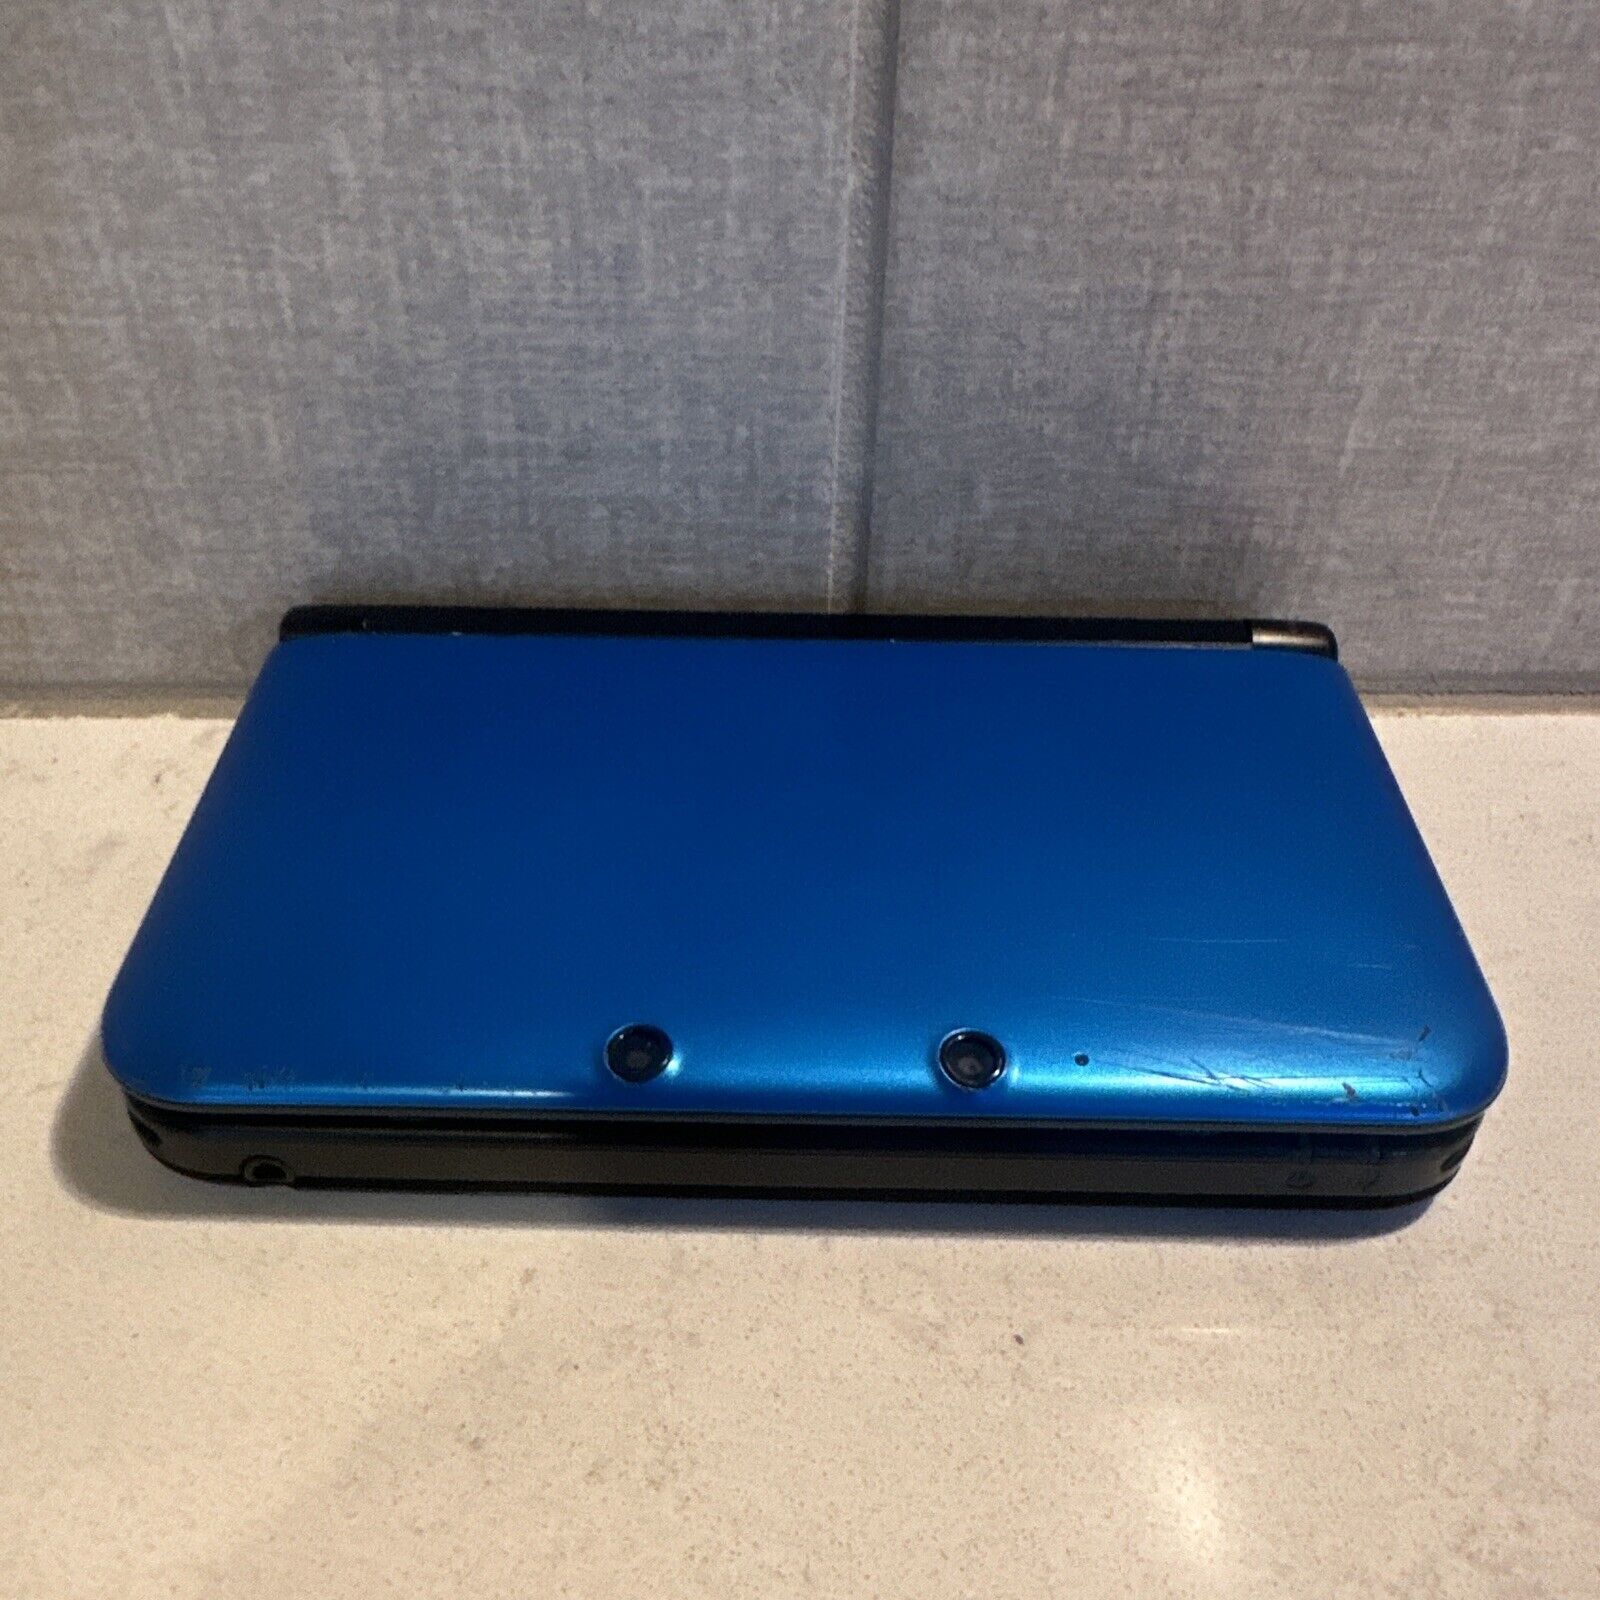 Nintendo 3DS XL BLUE Game System Charger Works No Stylus Body Damage